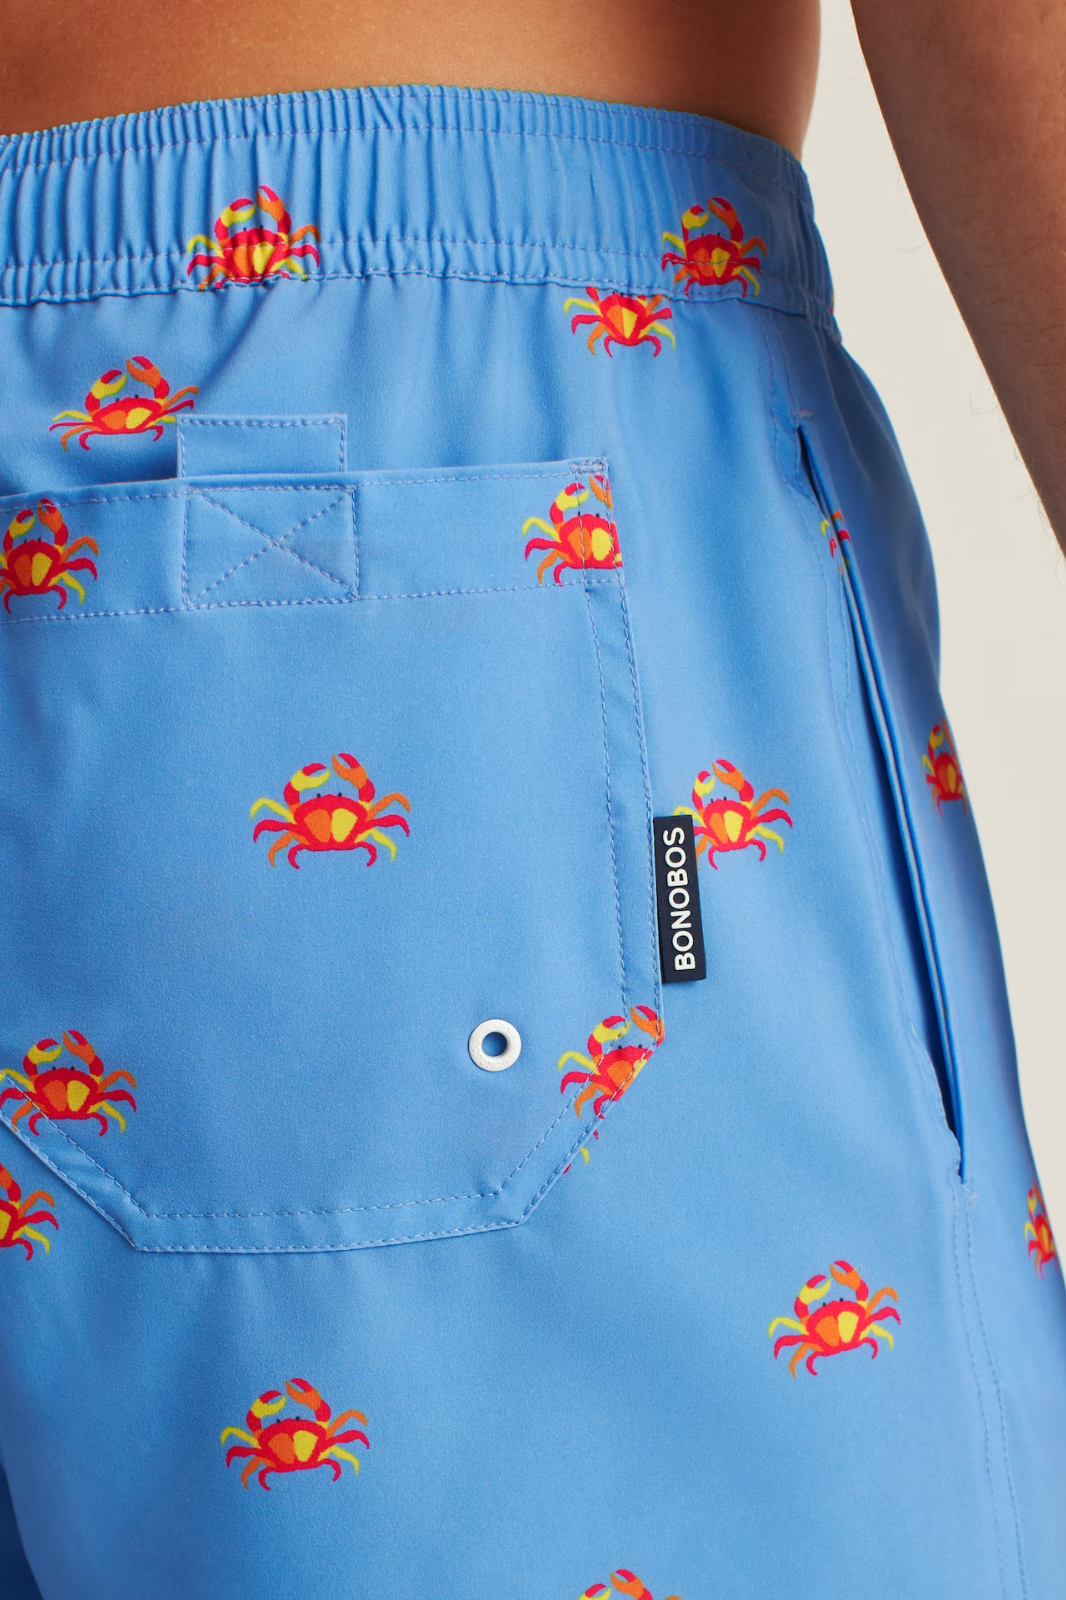 Bonobos Riviera Recycled Swim Trunks Colorful Crabs Printed Shorts